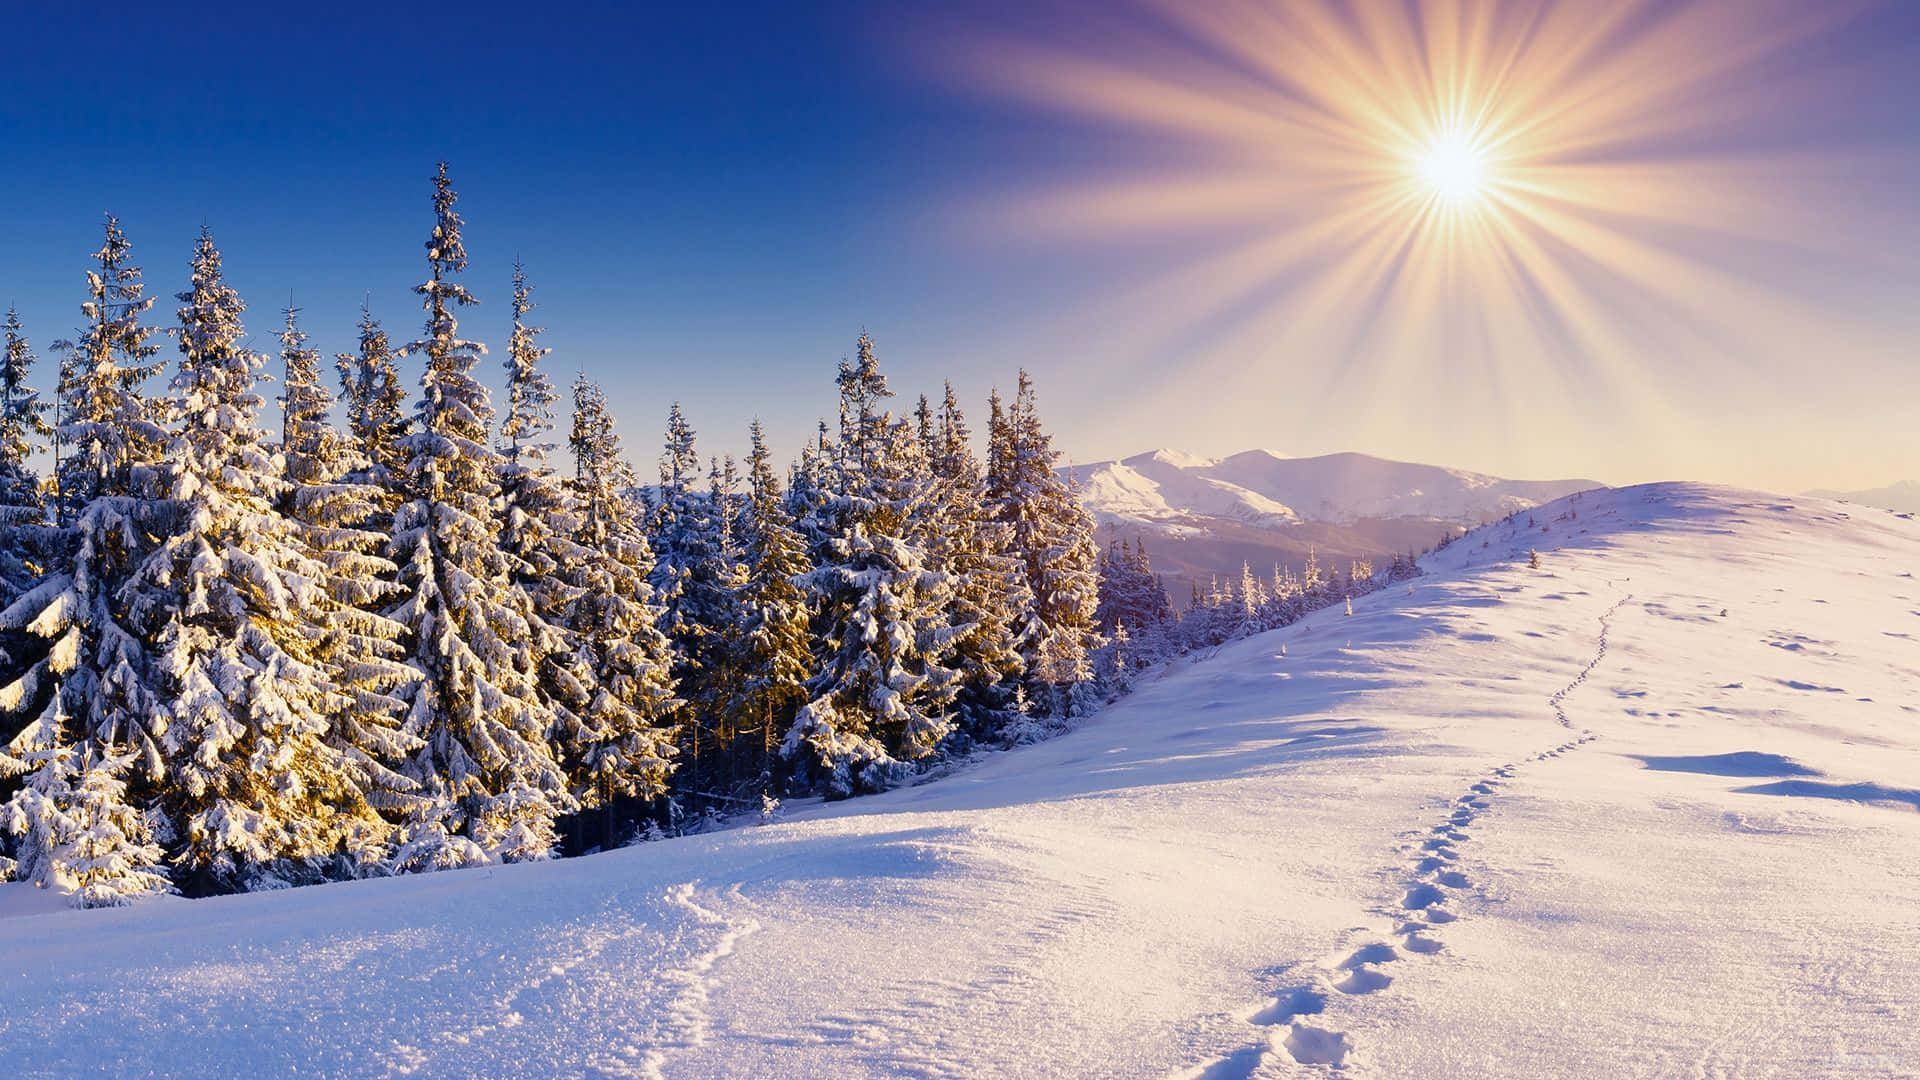 A Stunning View of a Snow-Covered Landscape Wallpaper